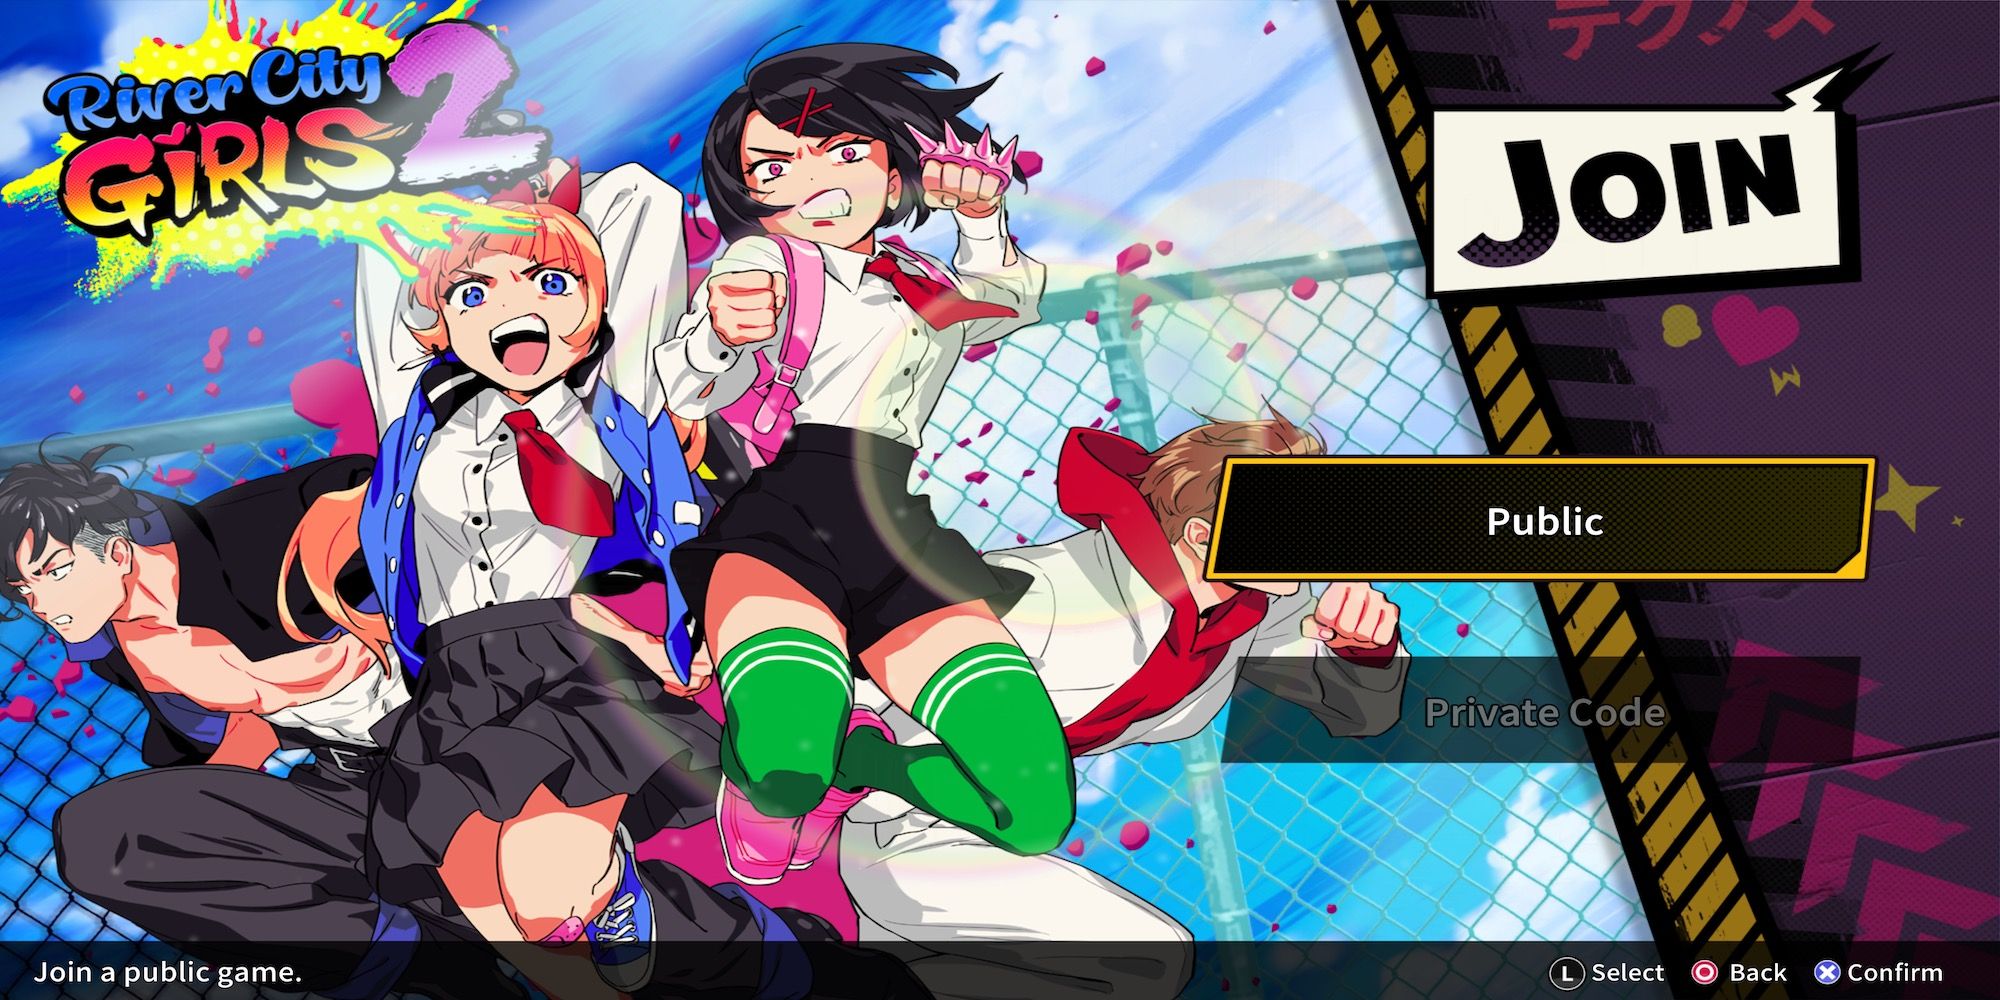 The multiplayer screen in River City Girls 2